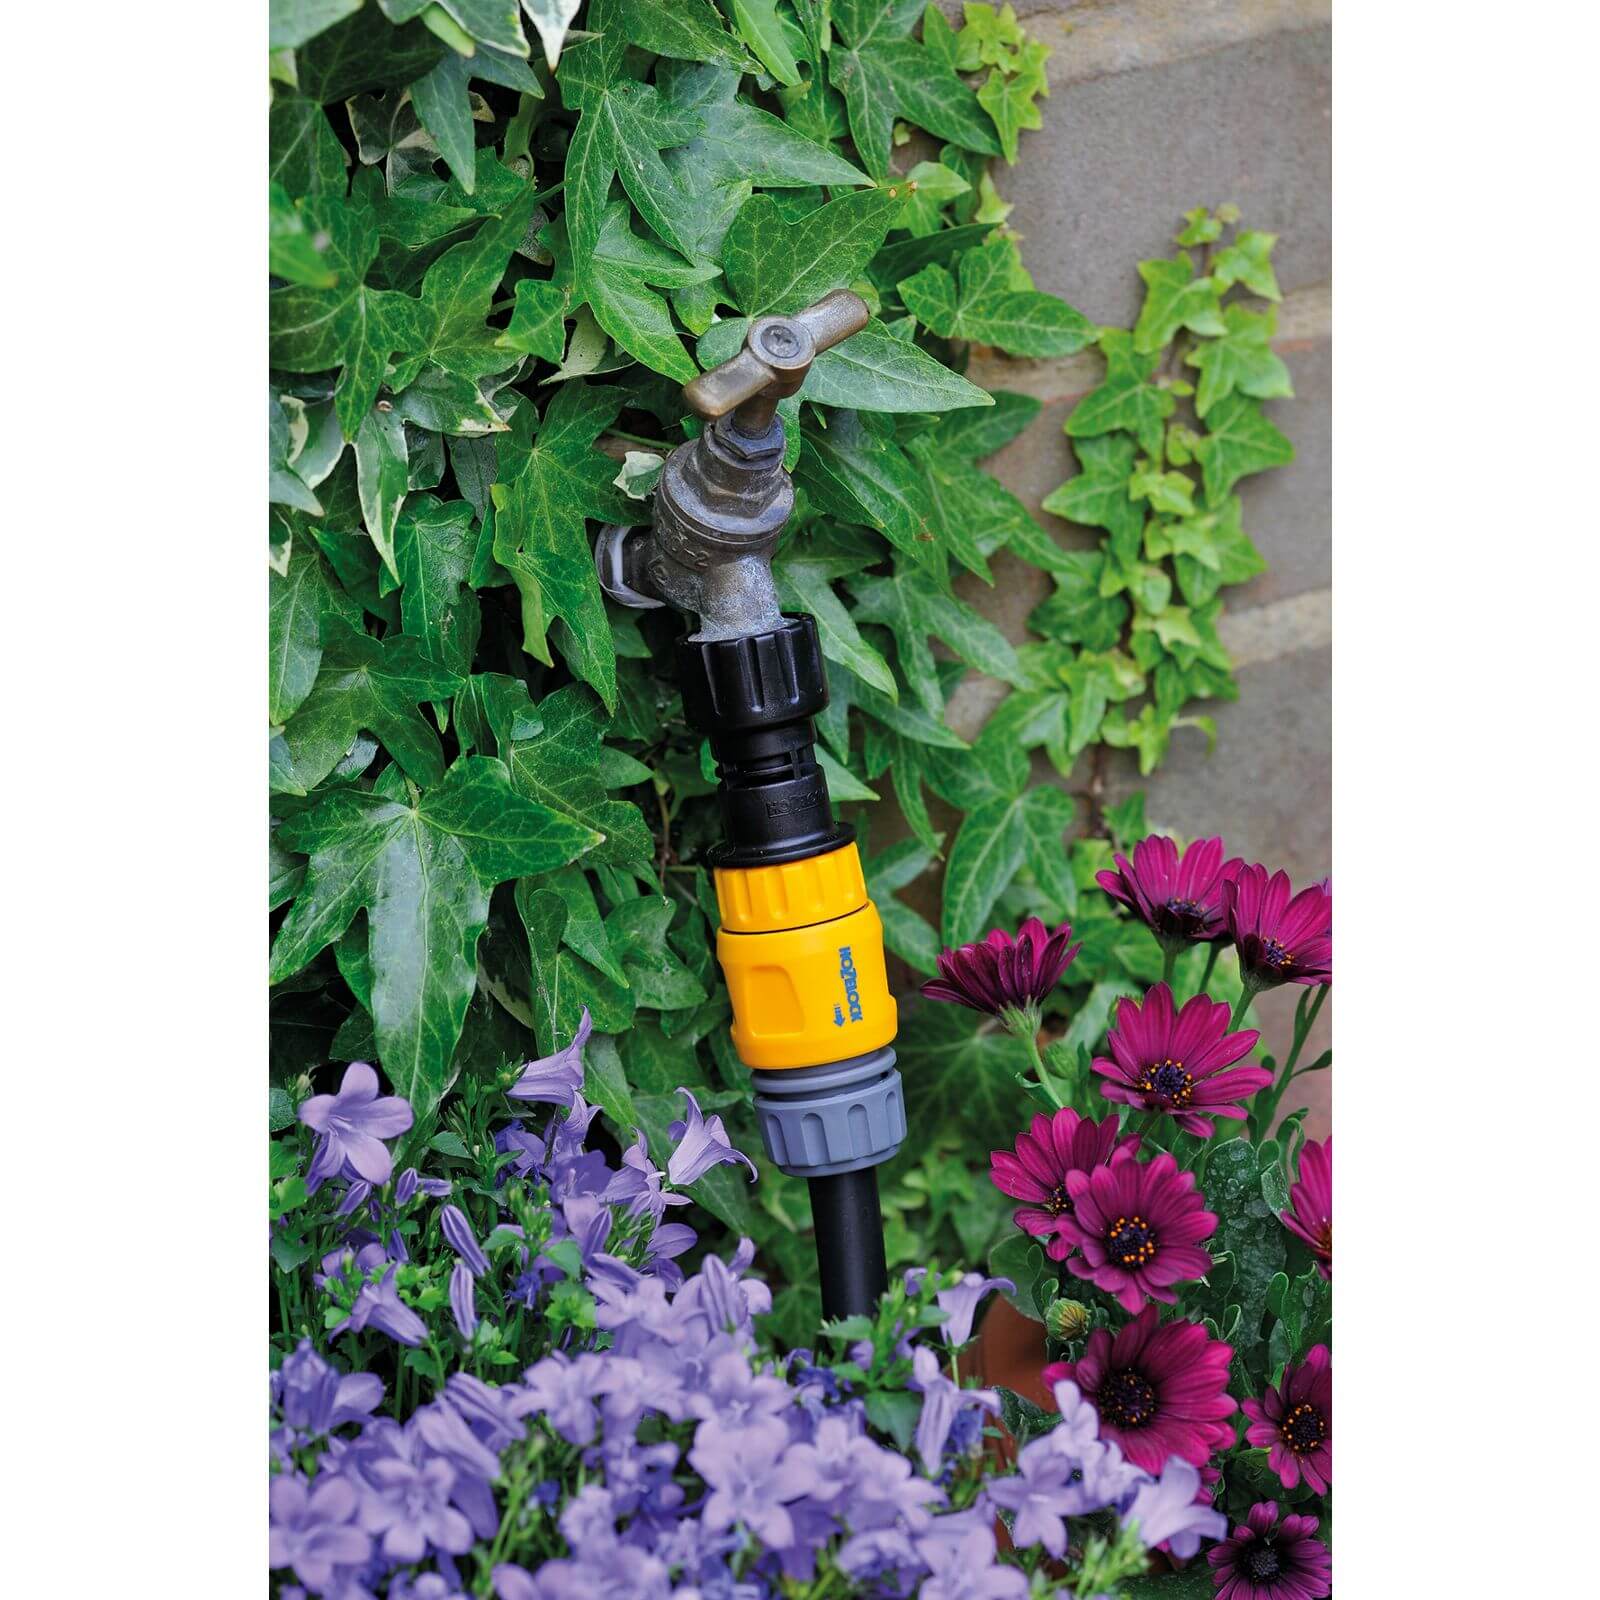 Hozelock Pressure Regulator for Automatic Watering System